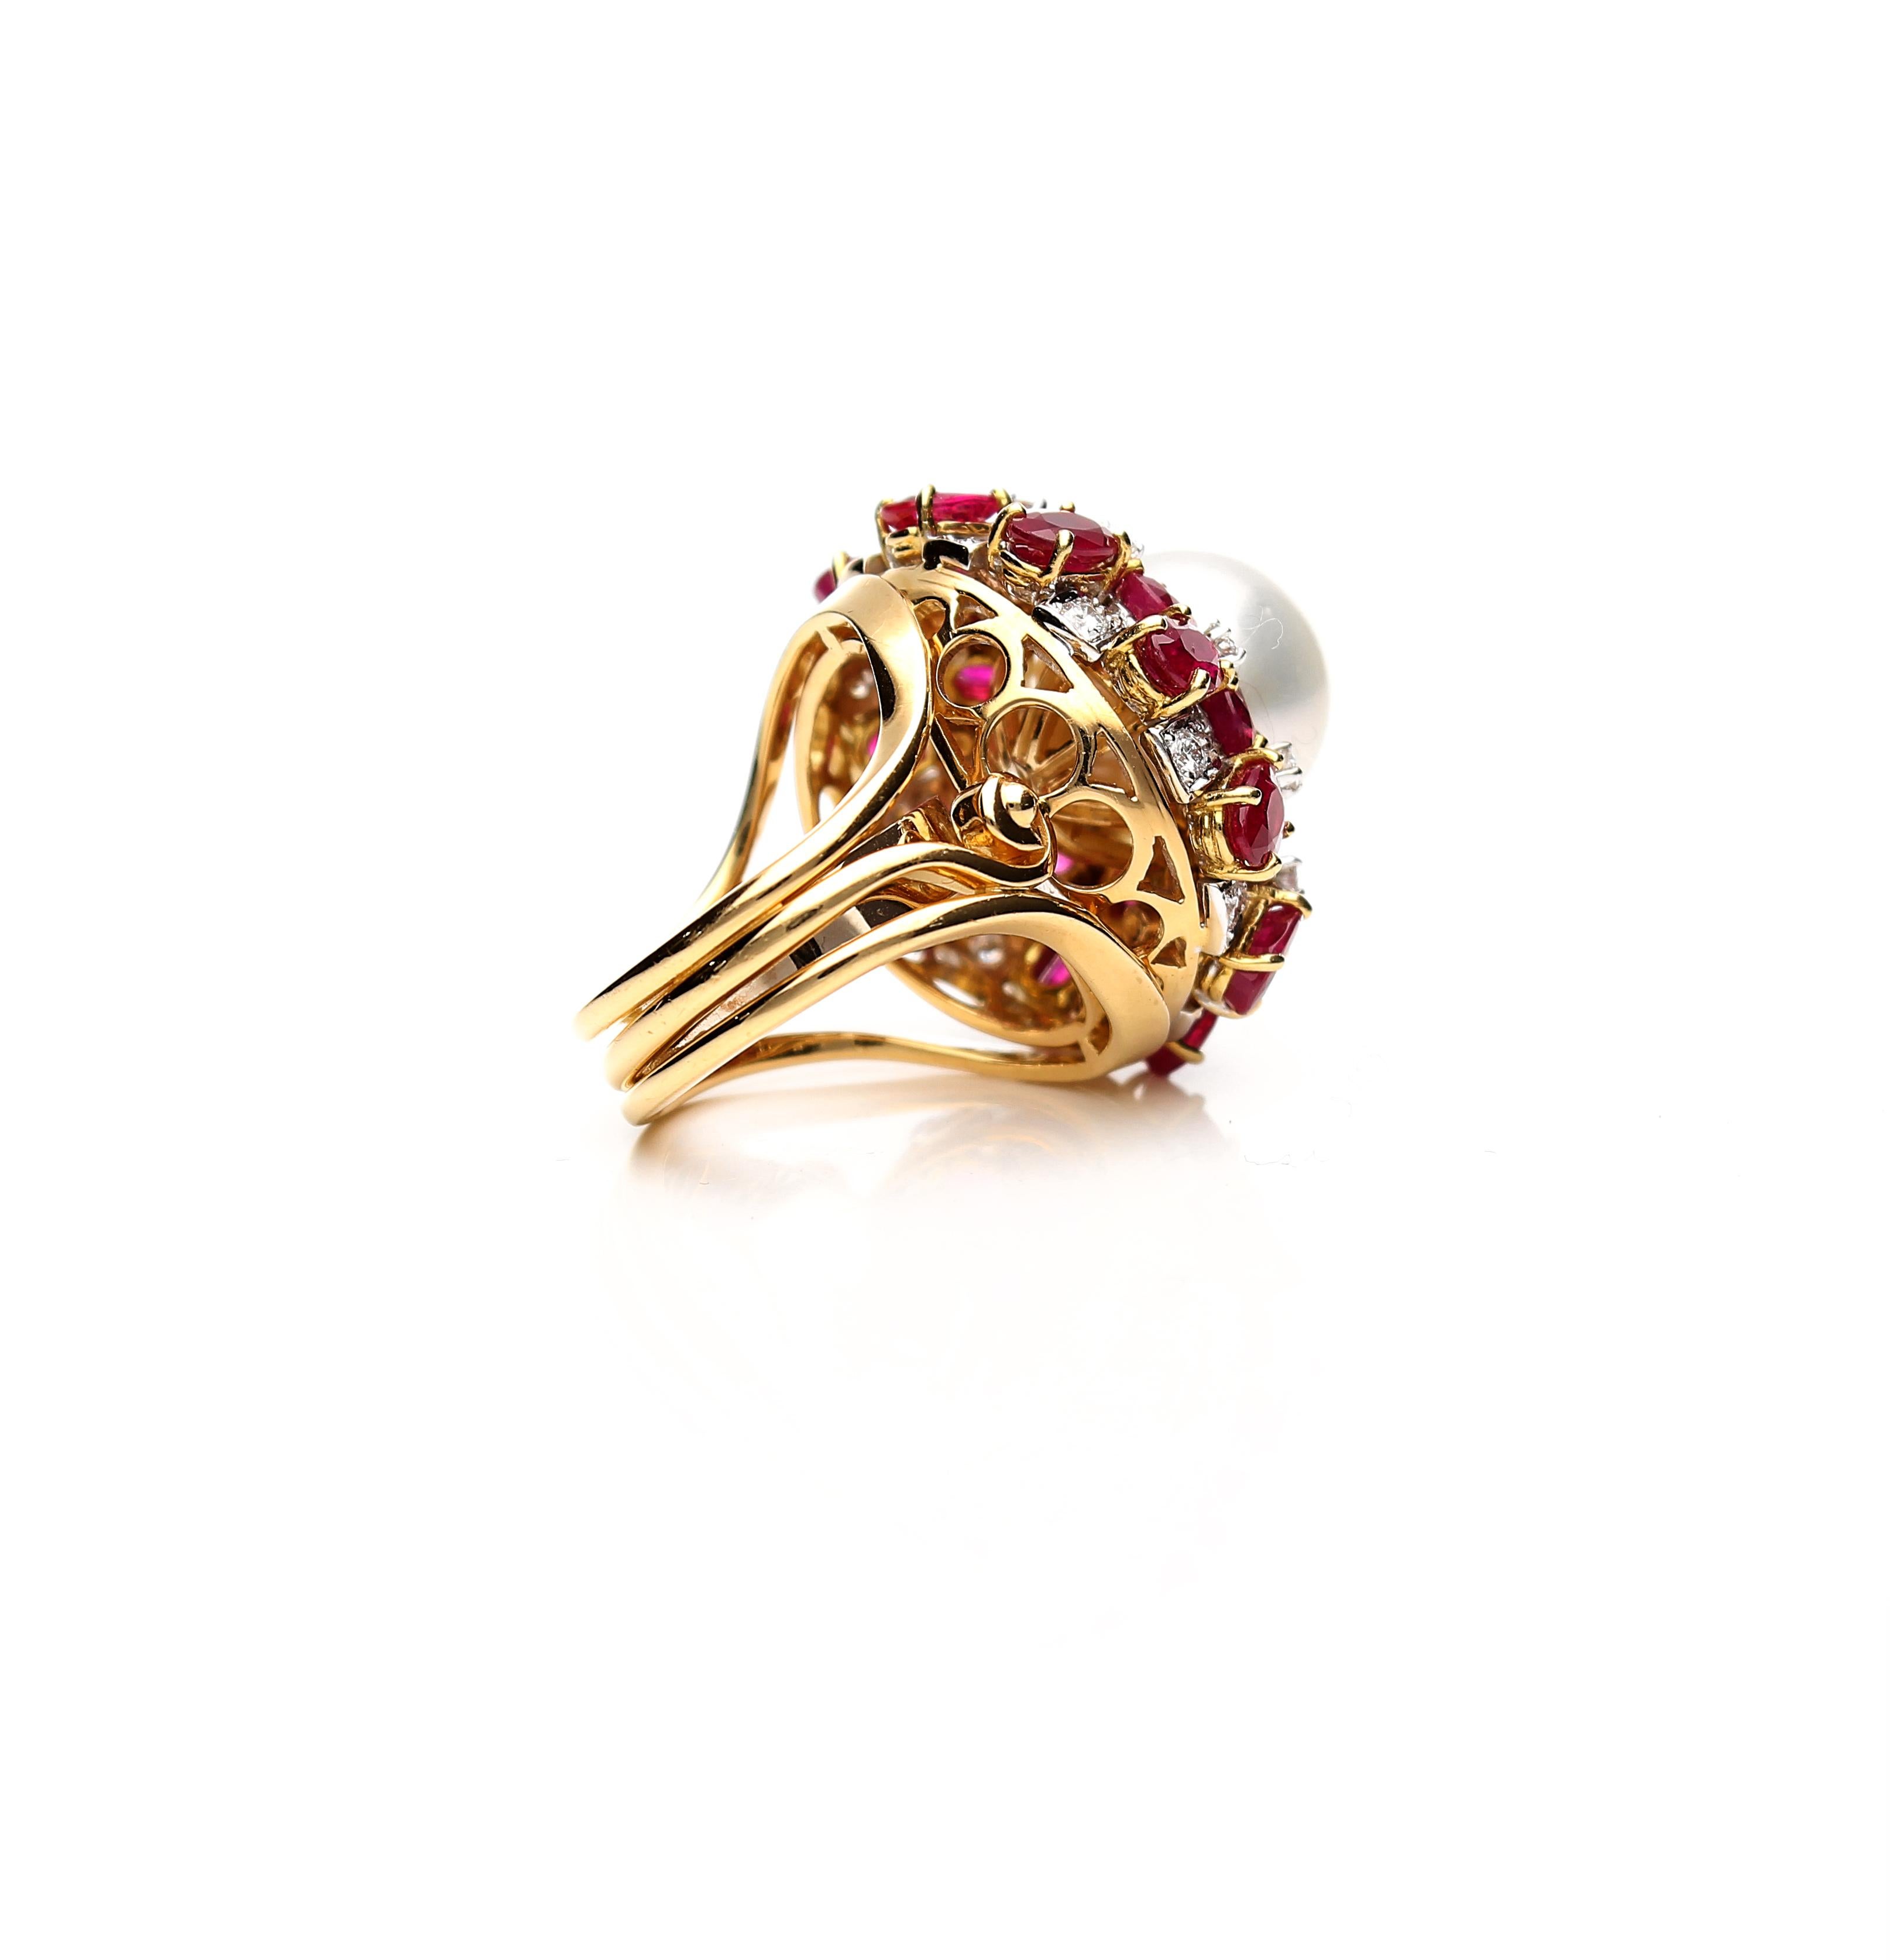 Women's 18 Karat Gold Ring with Oval Cut Rubies, Diamonds and South Sea Pearl